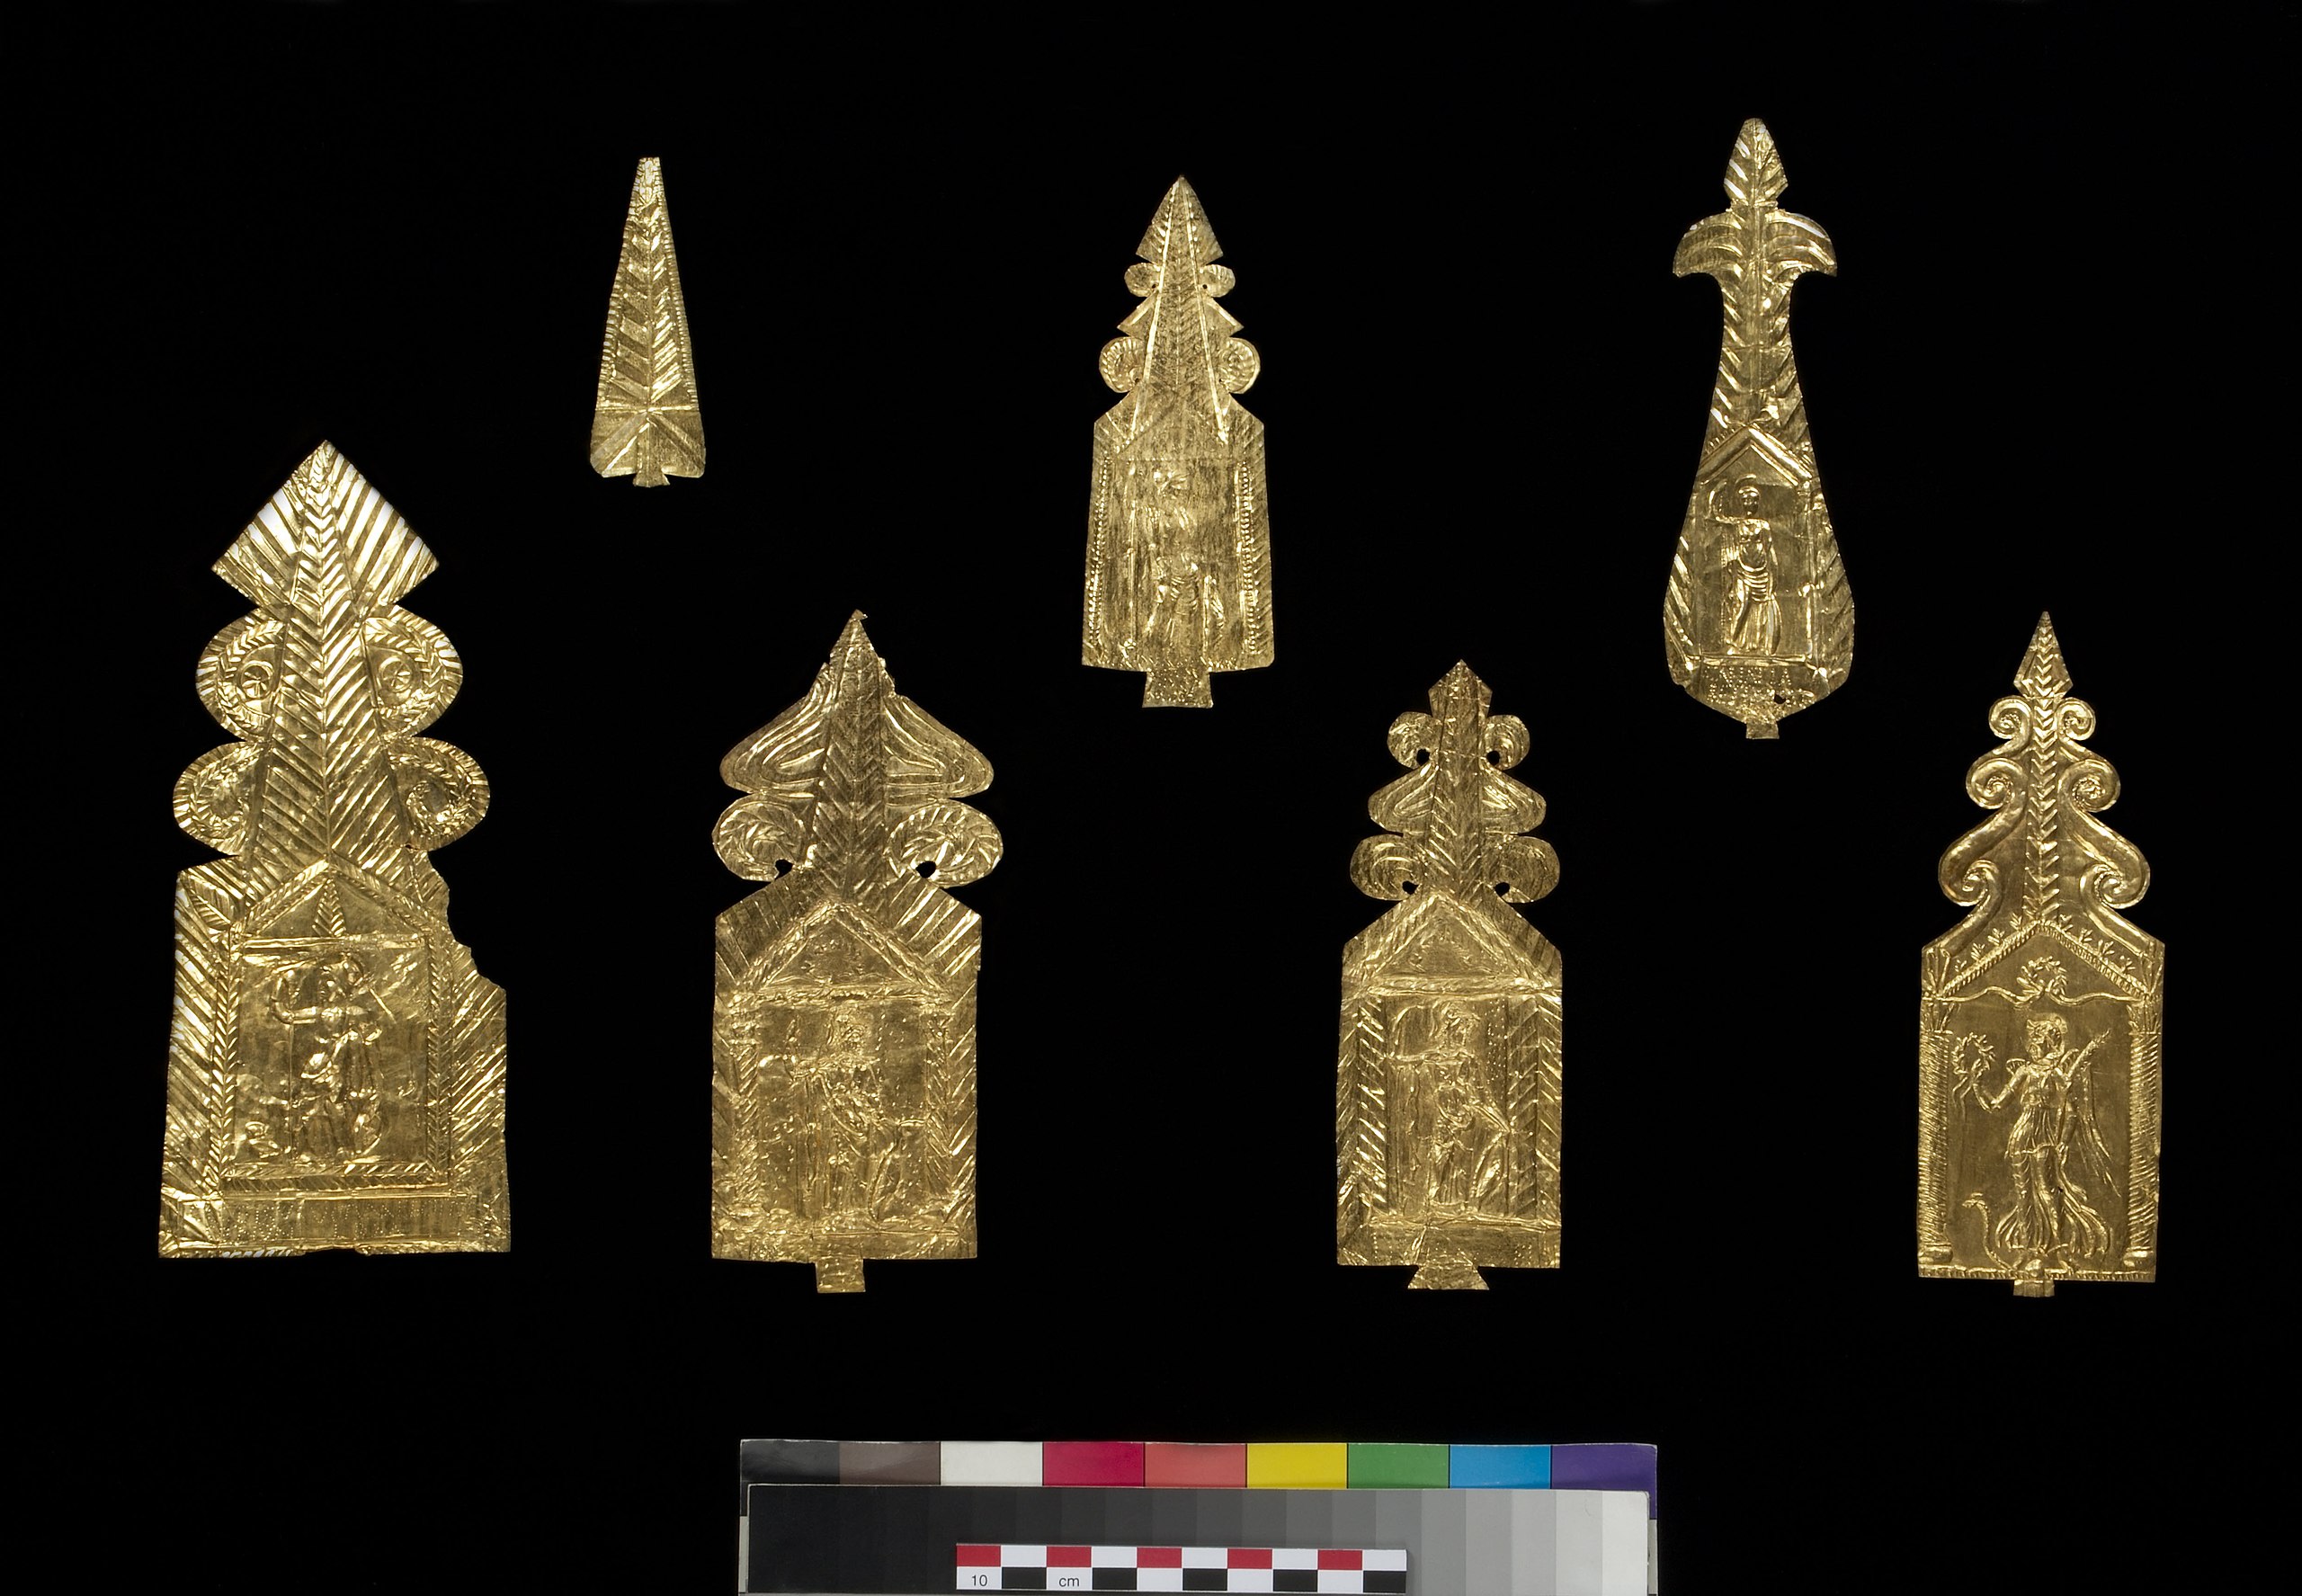 File:Gold plaques (items 9-14 in catalogue) (FindID 509533).jpg - Wikimedia Commons